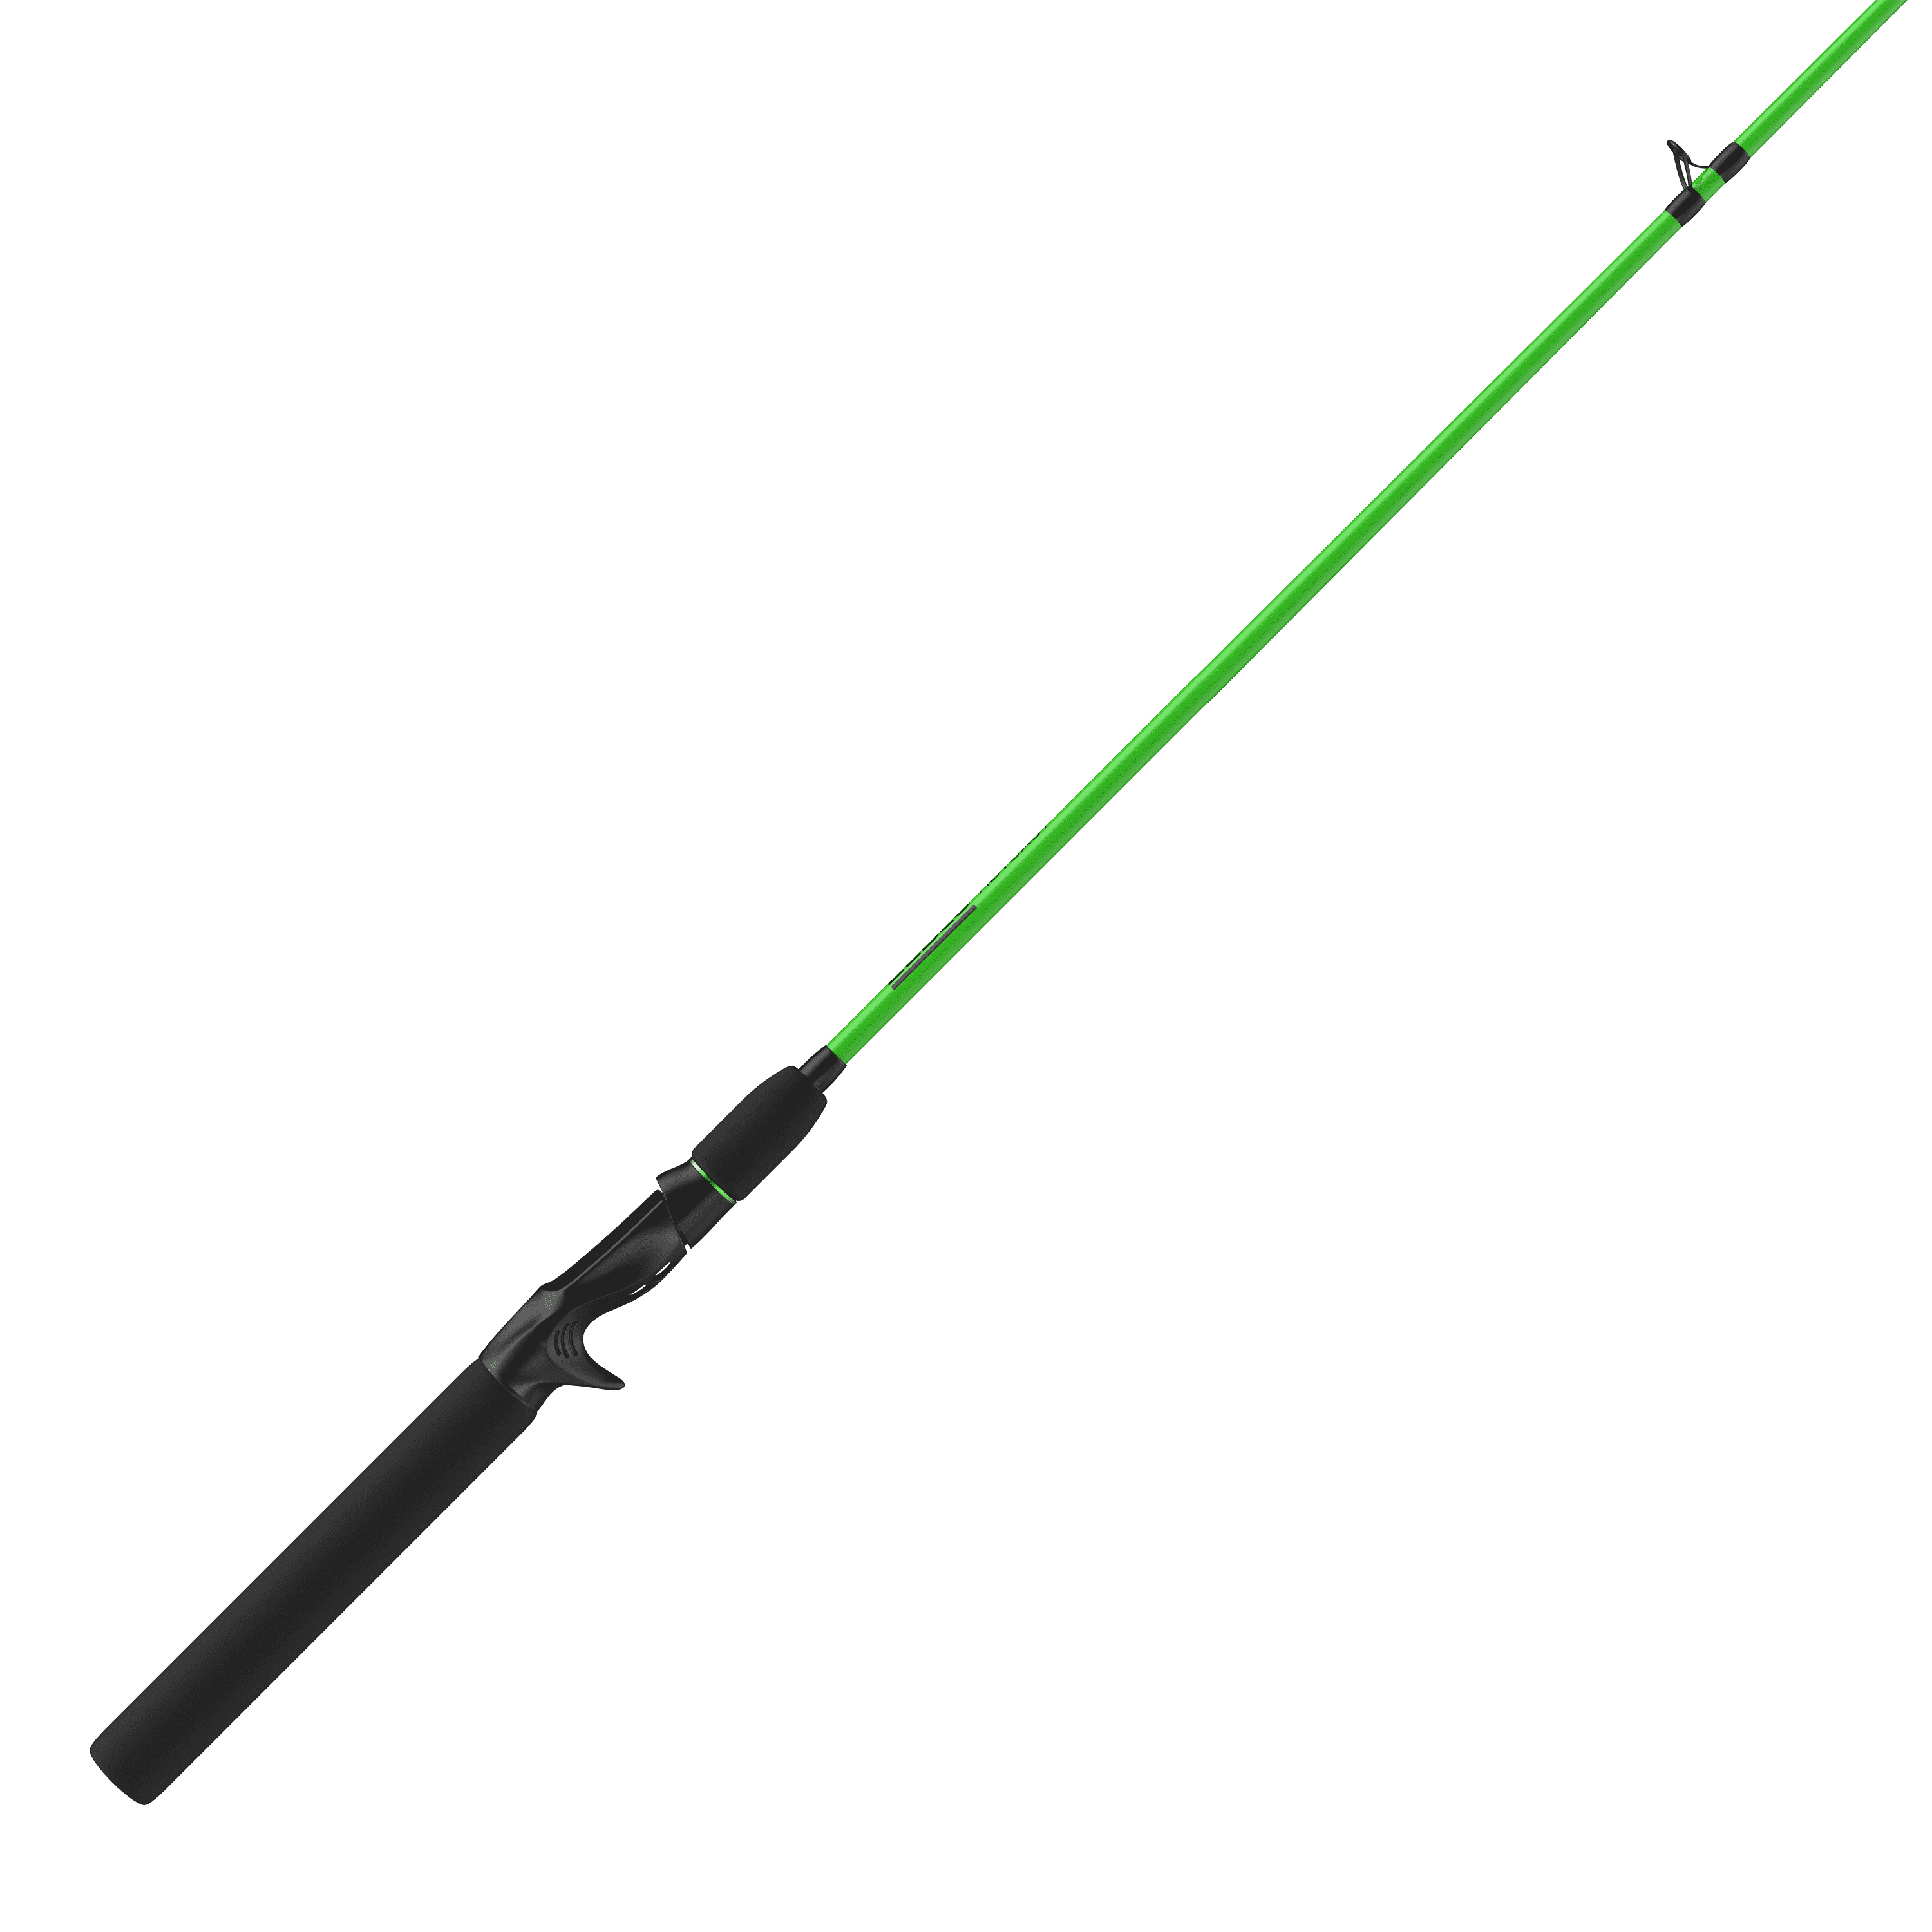 B&M T102 T Slip Joint Cane Pole 10-feet 2 PC Spinning Rods Fishing Sporting for sale online 